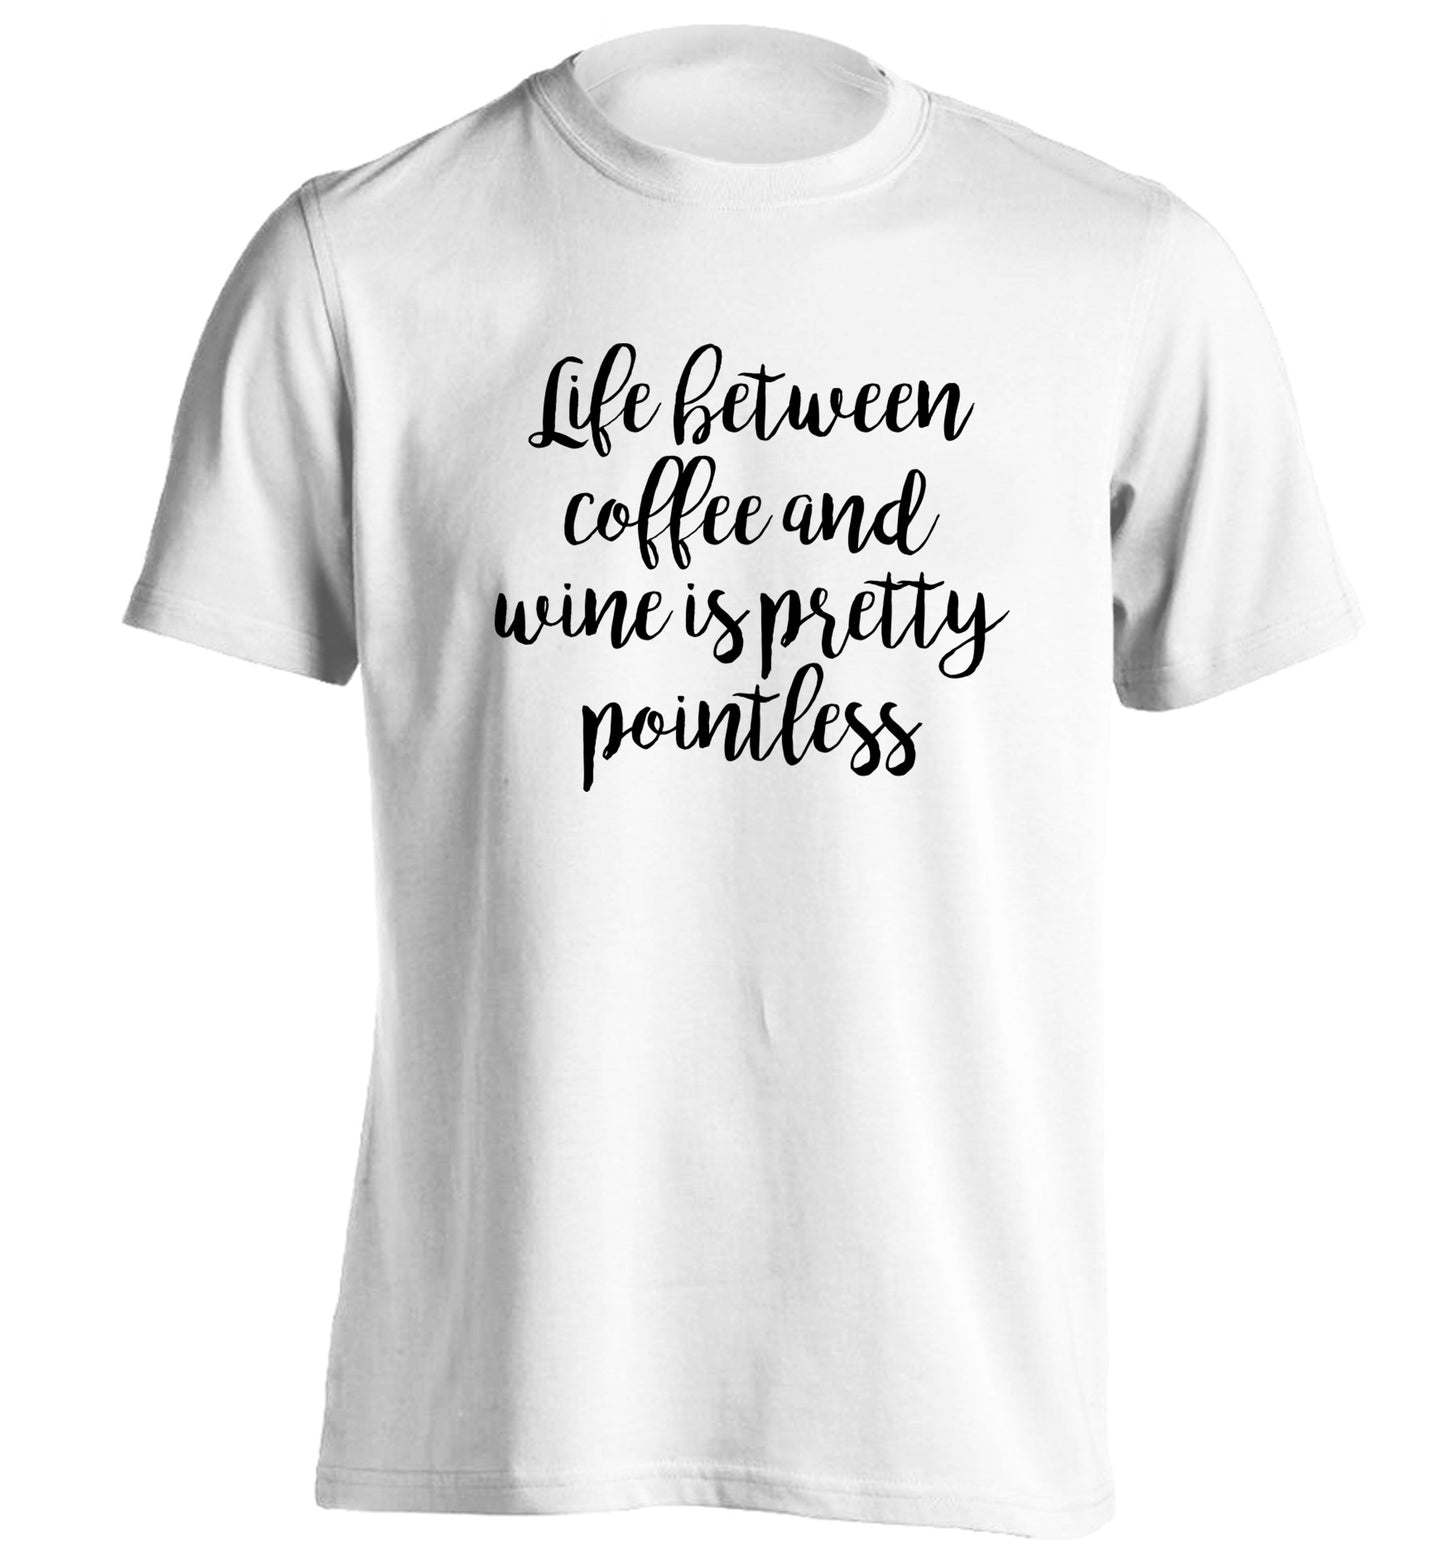 Life between coffee and wine is pretty pointless adults unisex white Tshirt 2XL